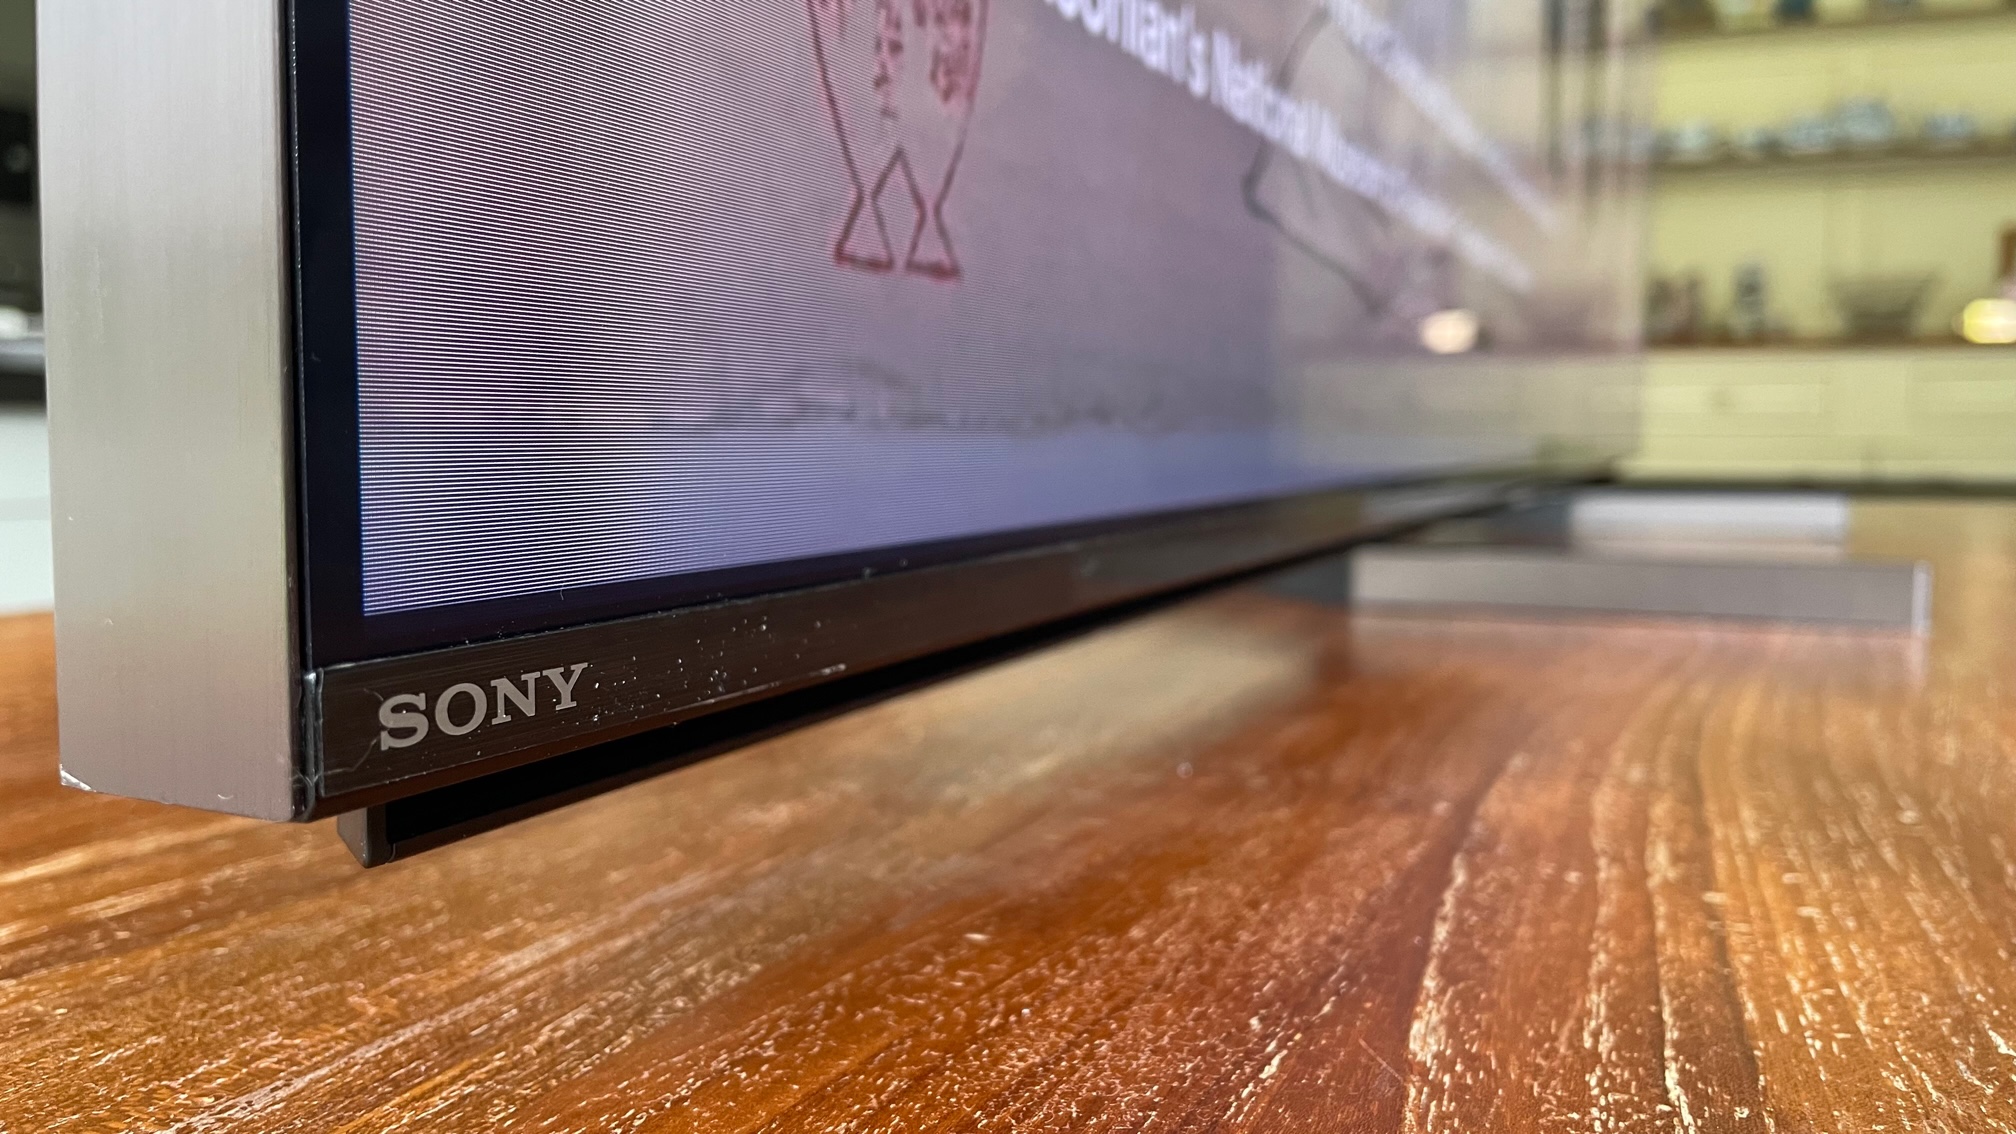 A close up of the Sony logo on the X95L